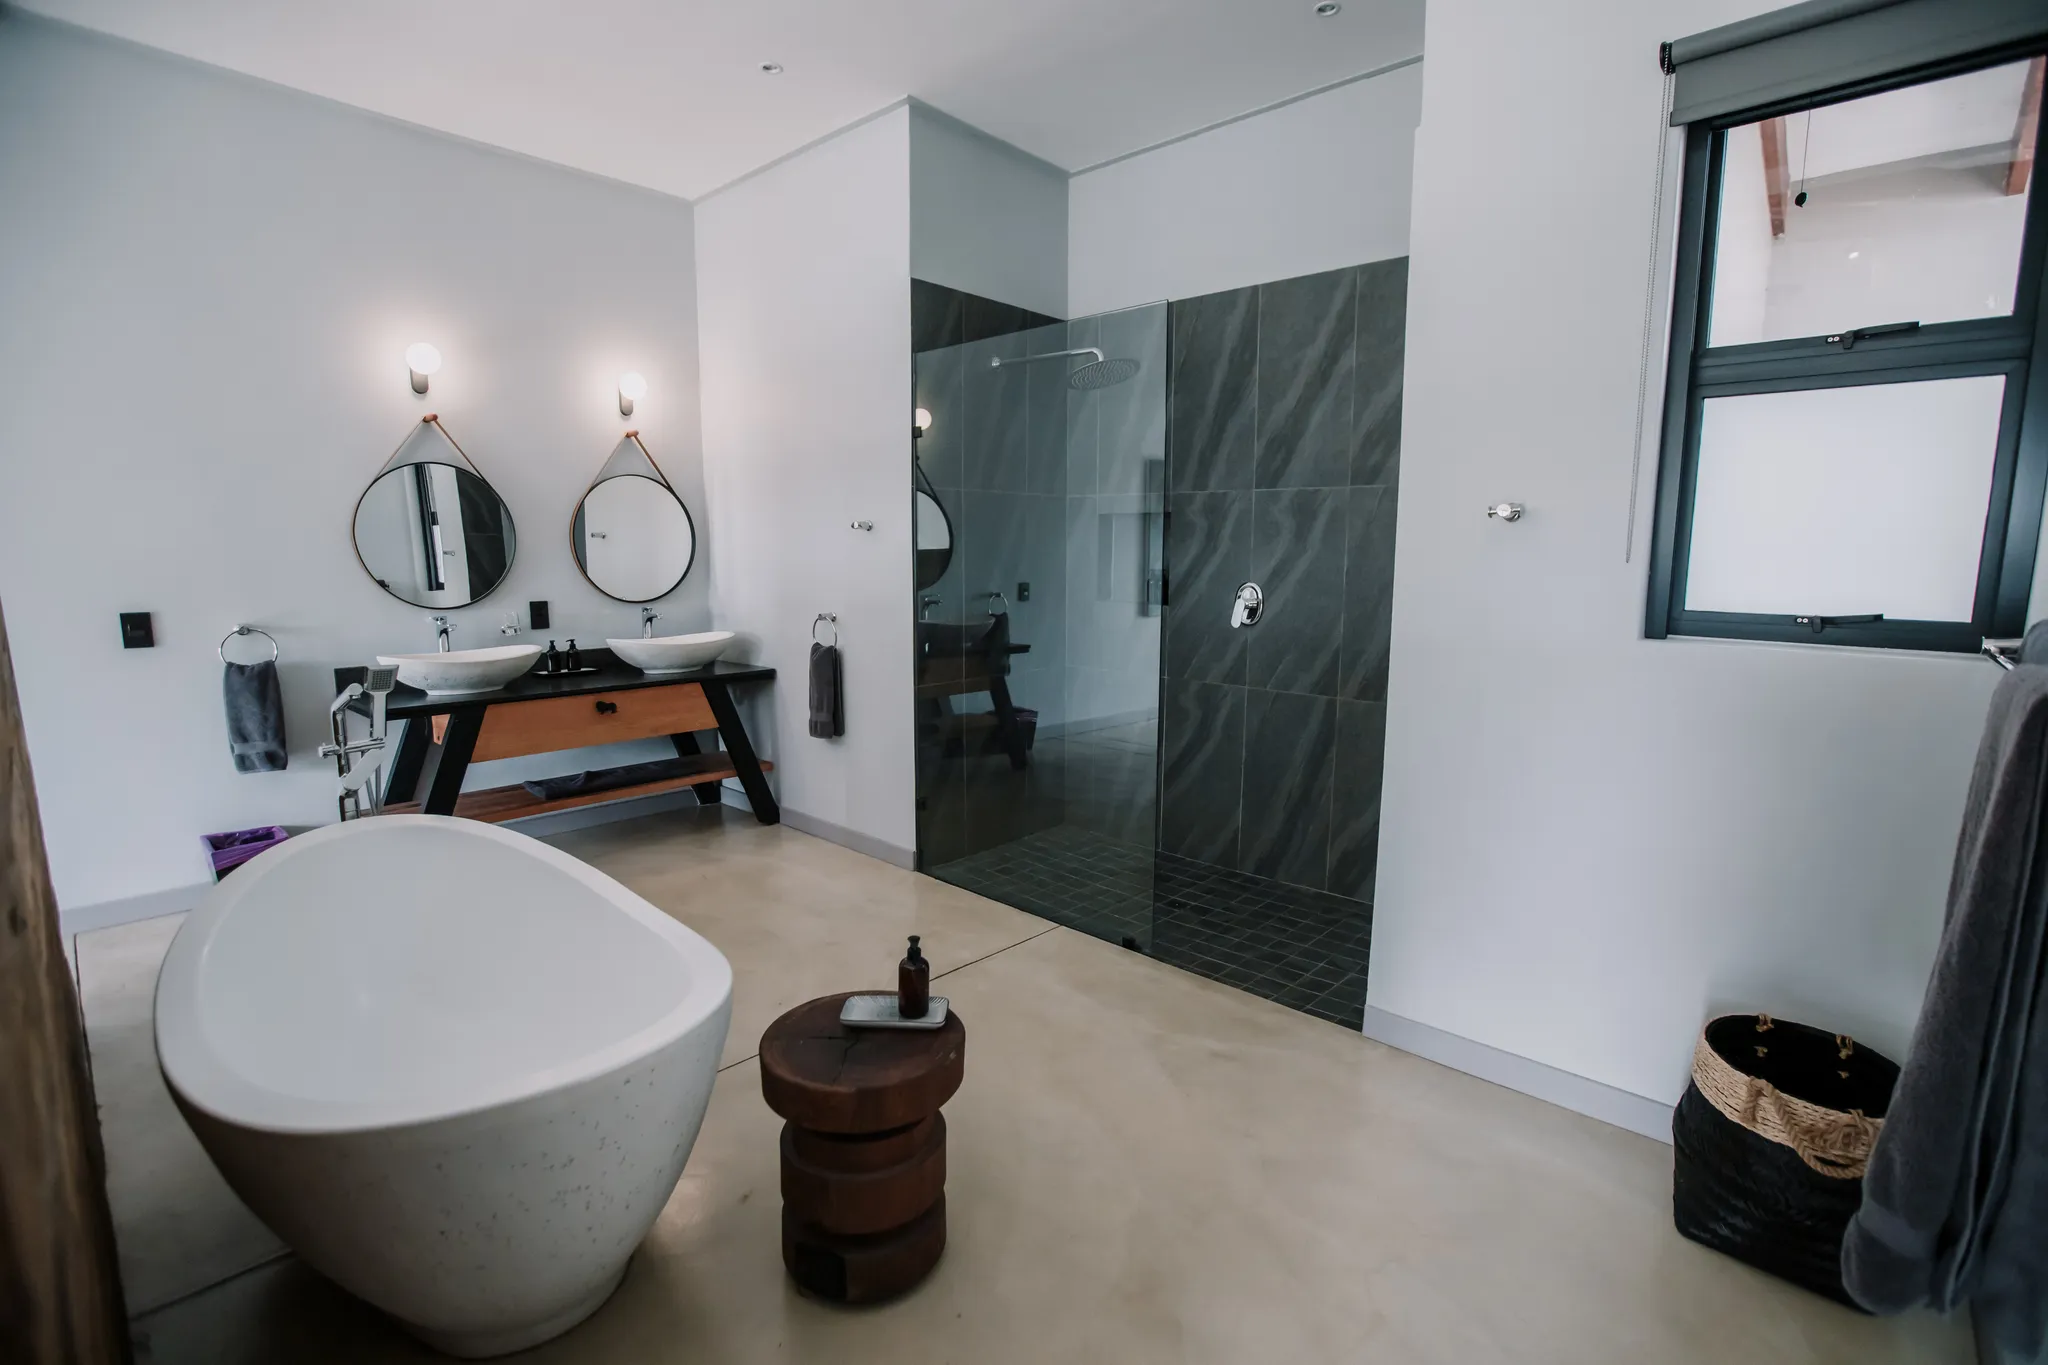 A large bathroom with a freestanding bath, large shower and two sinks.